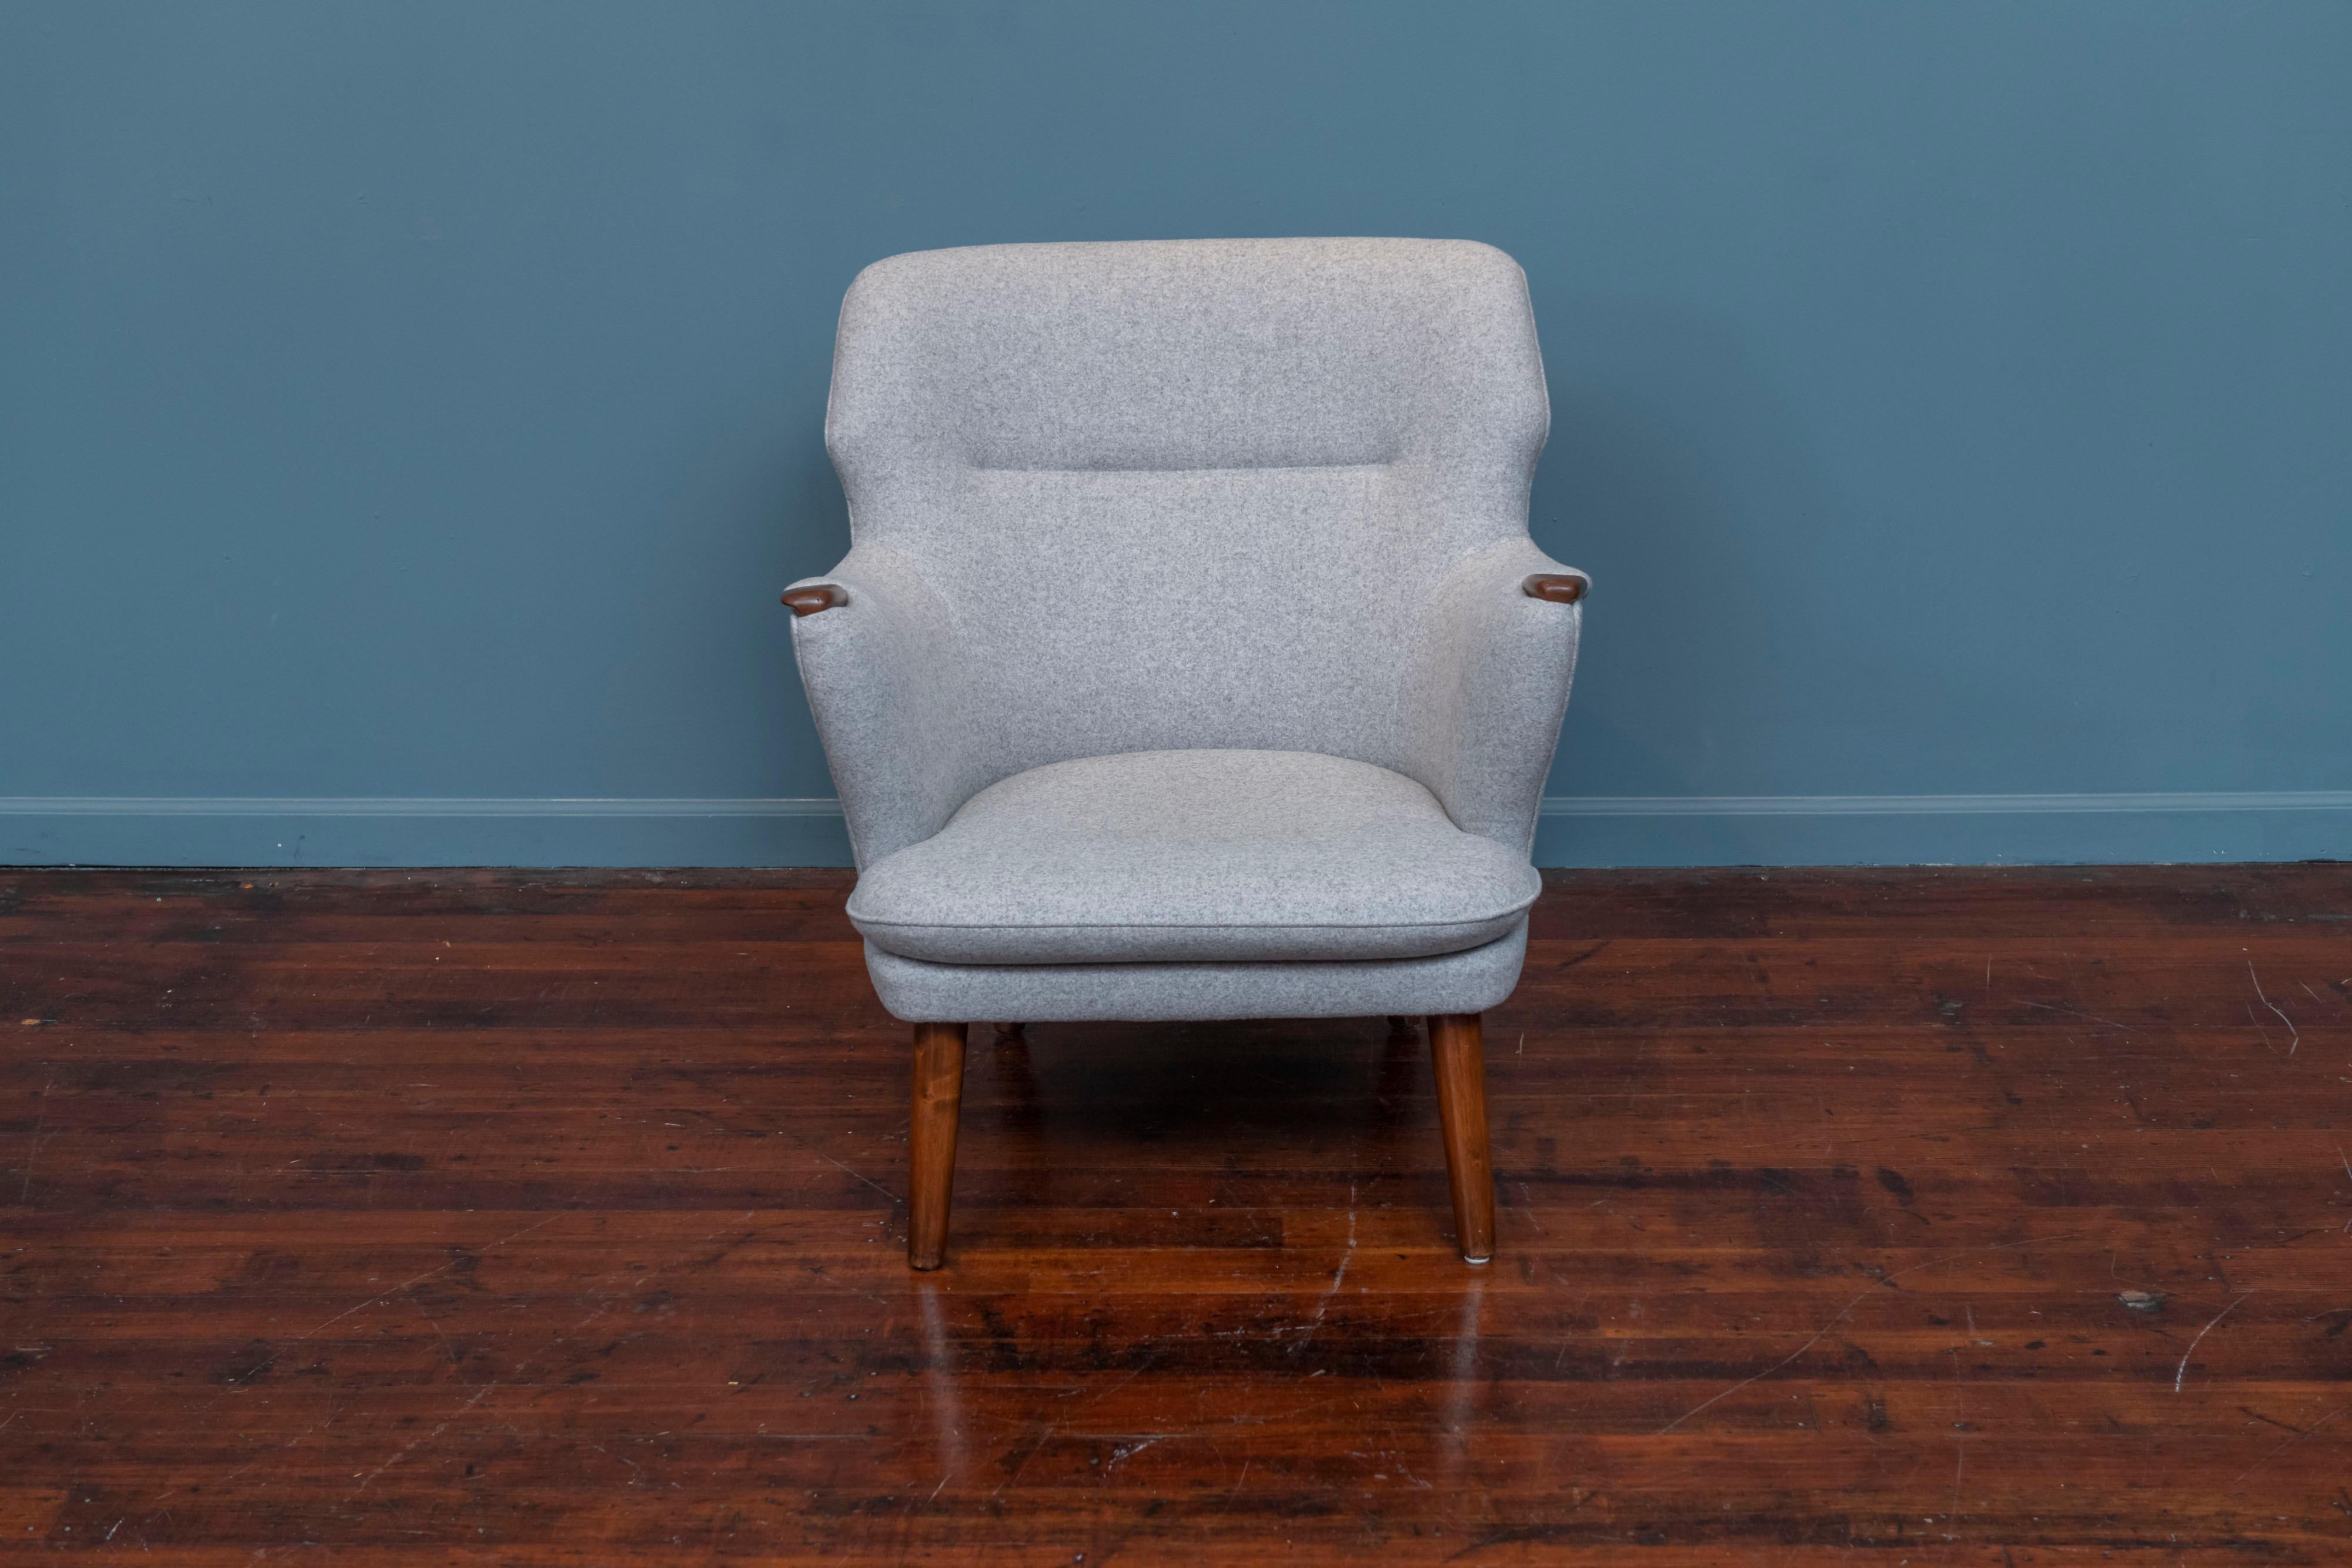 Kurt Olsen design lounge chair for Anderson & Bohm, Denmark. Newly upholstered in a light grey wool felt and refinished teak leads and arm pads. Super comfy and ready to enjoy.